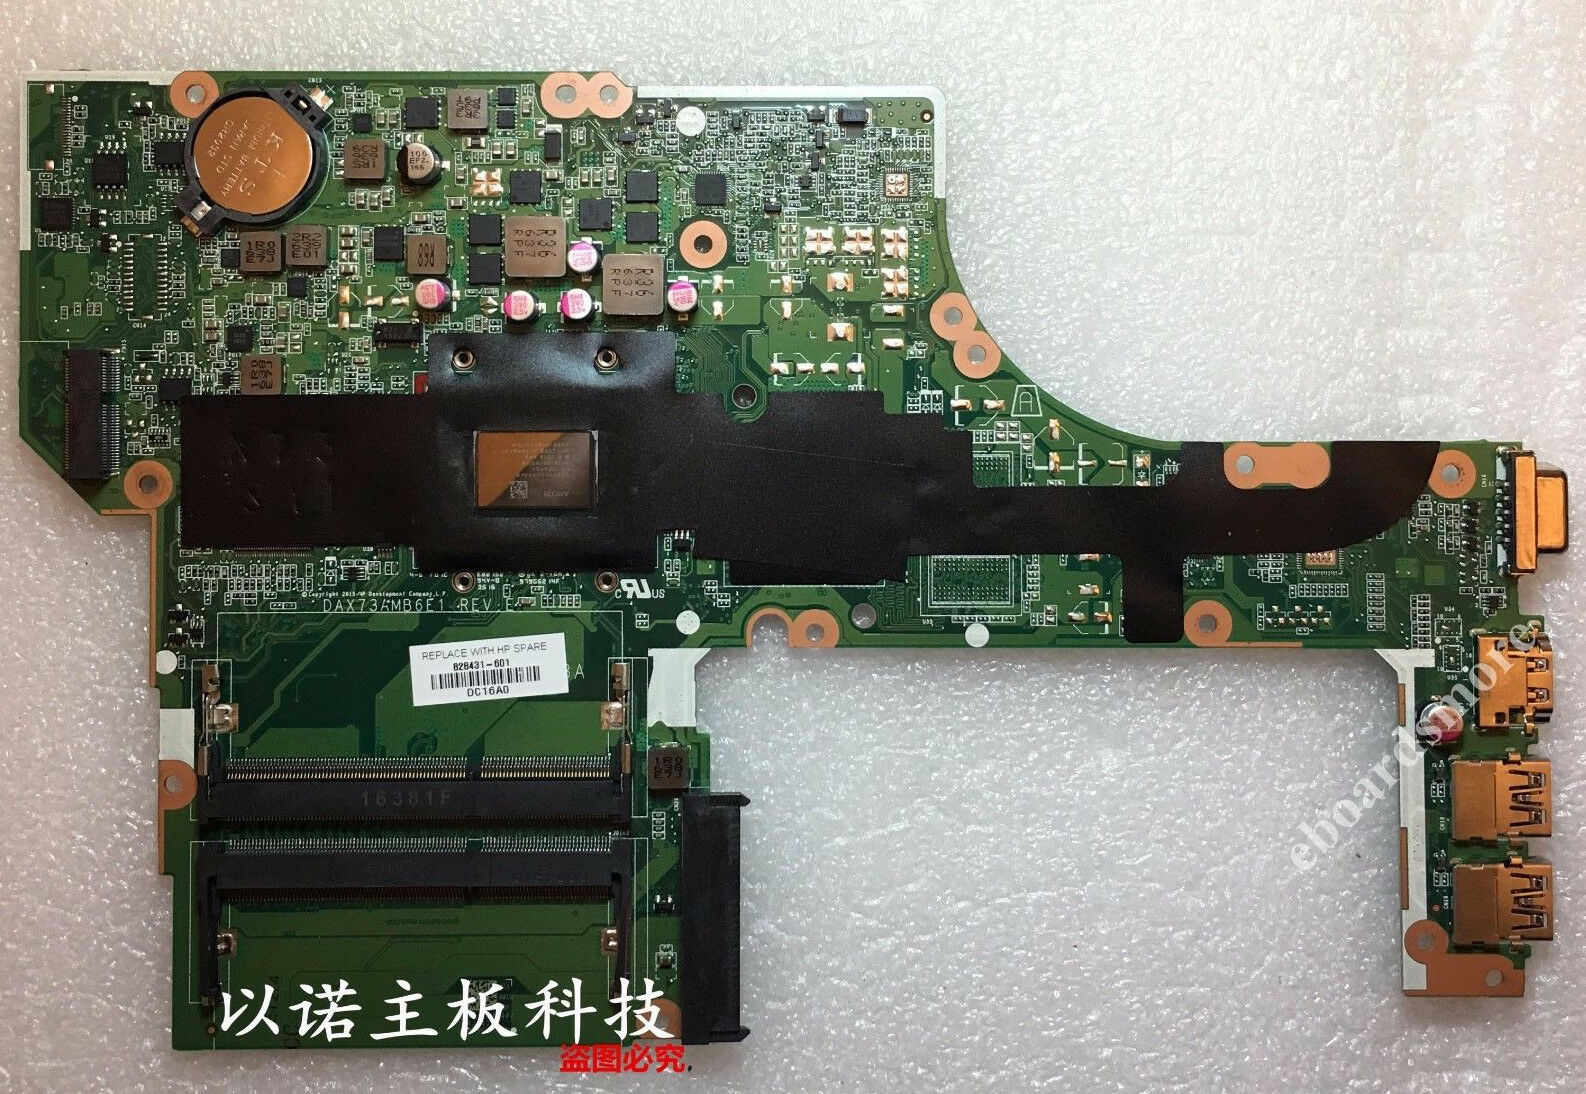 828431-001 AMD A10 Motherboard for HP 455 G3 Laptop, DAX73AMB6E1, by DHL EXPRESS Brand: HP MPN: DAX73AMB6